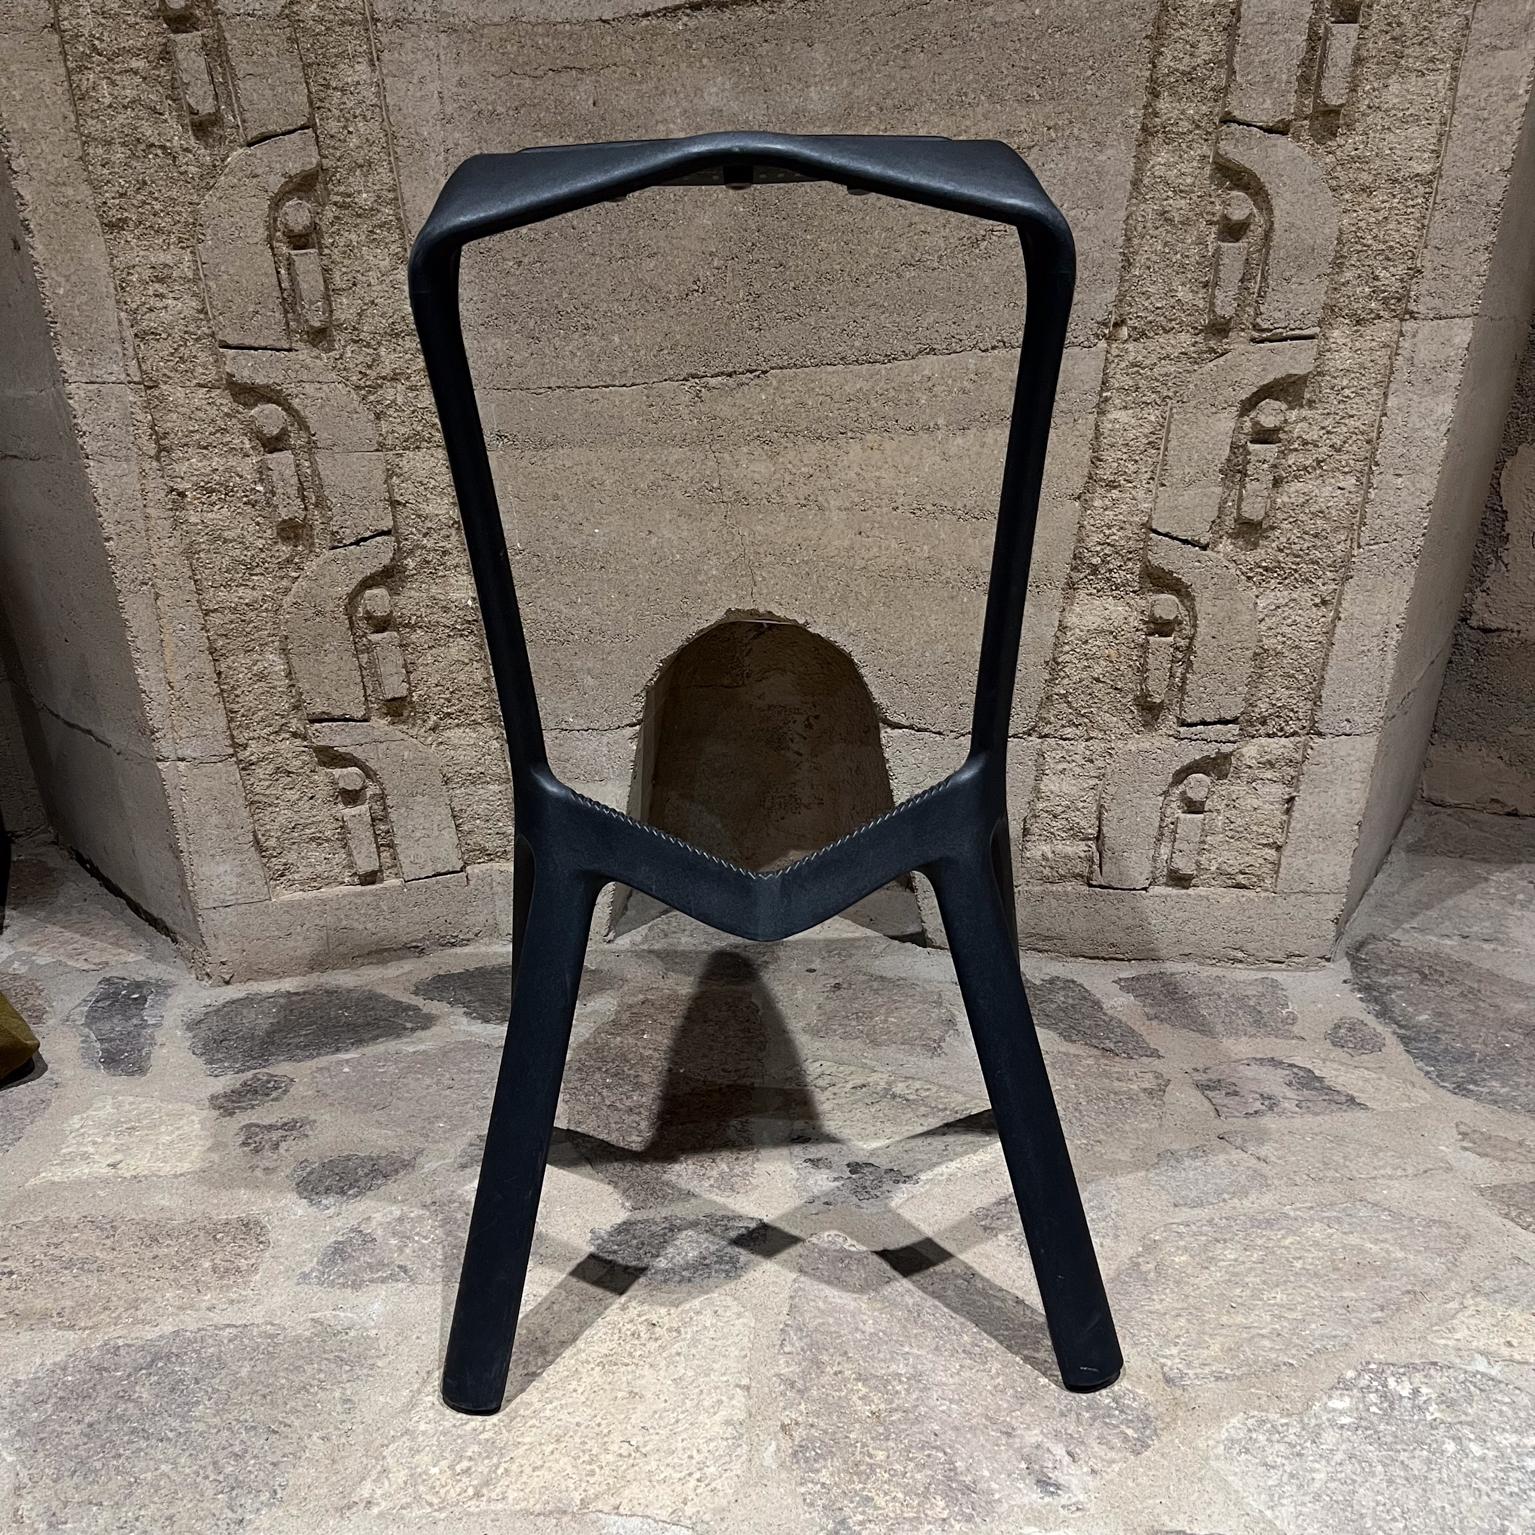 
Miura Barstool Designed by Konstantin Grcic for Plank
Made in Italy
stackable
Indoor outdoor
Plastic
31.5 h x 15.25 d x 17.5 w, footrest 13.25 h
Unrestored preowned condition
Refer to images provided